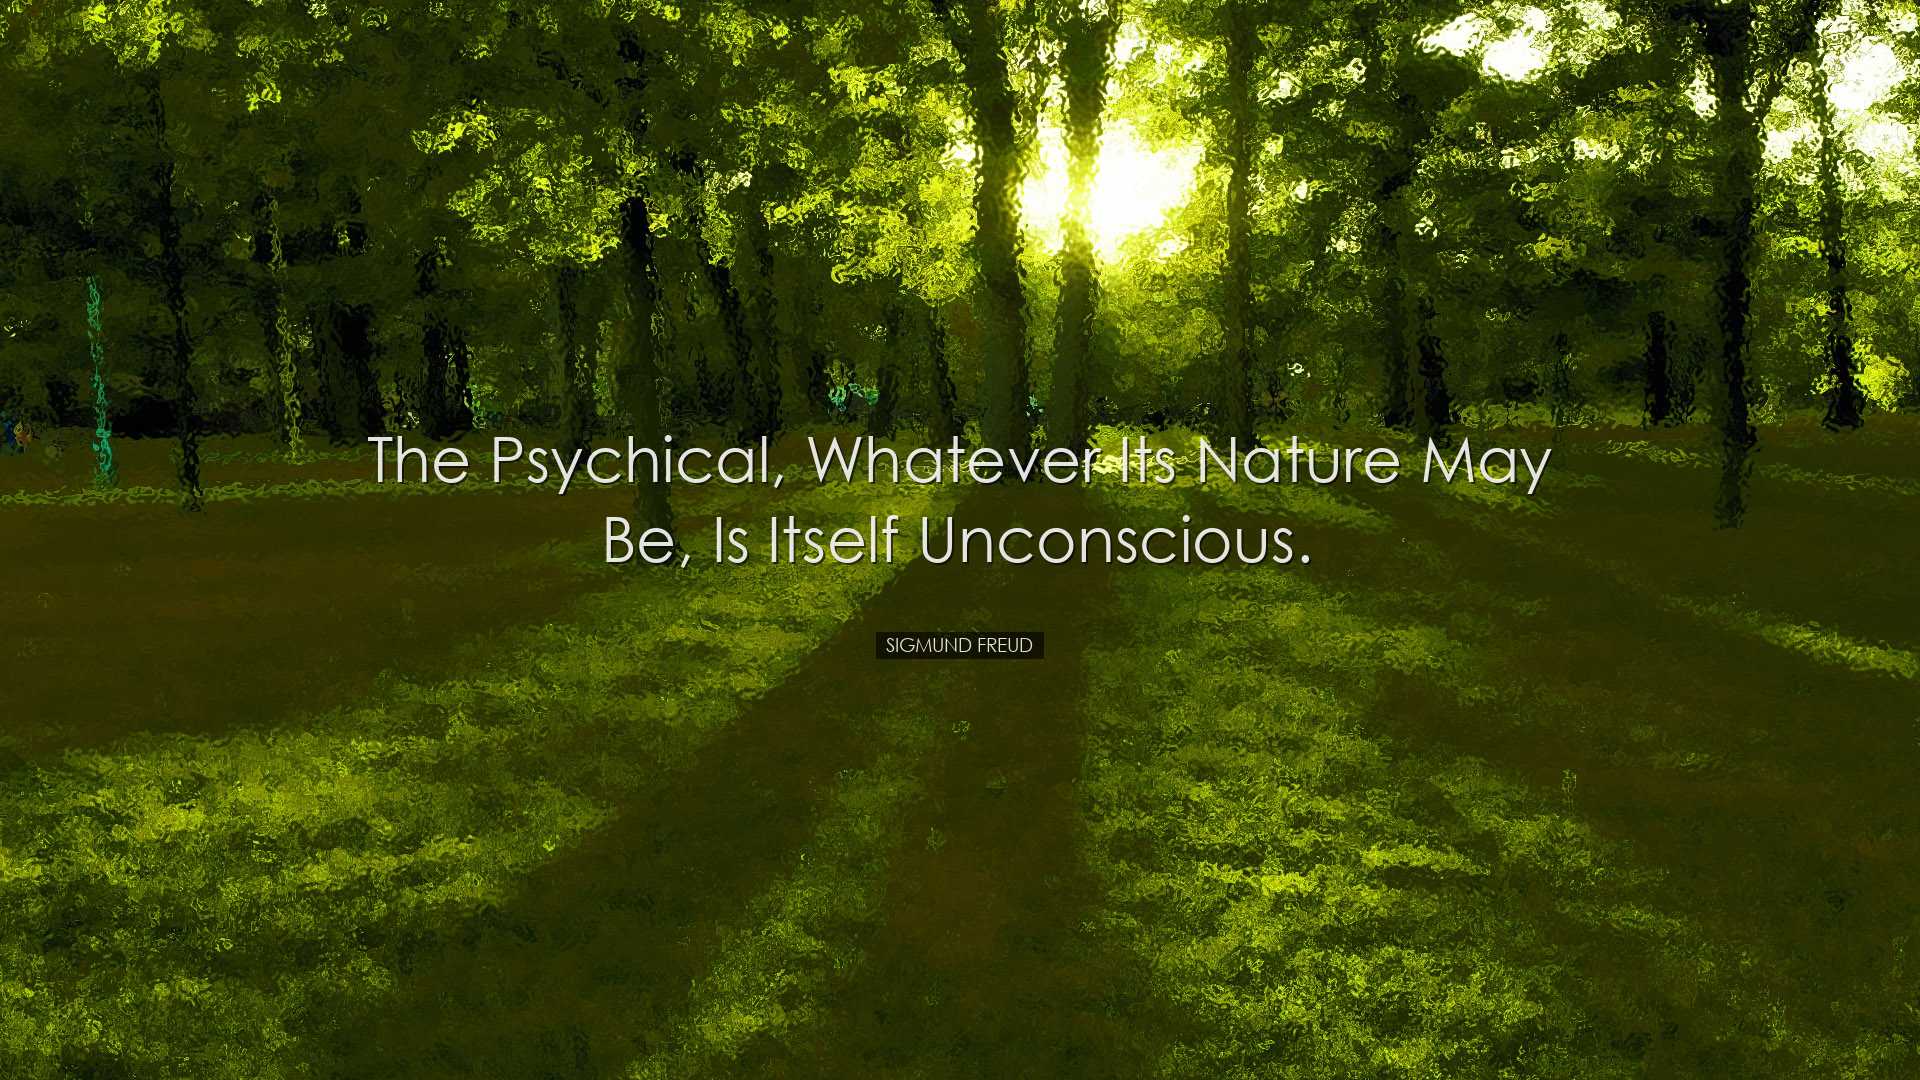 The psychical, whatever its nature may be, is itself unconscious.